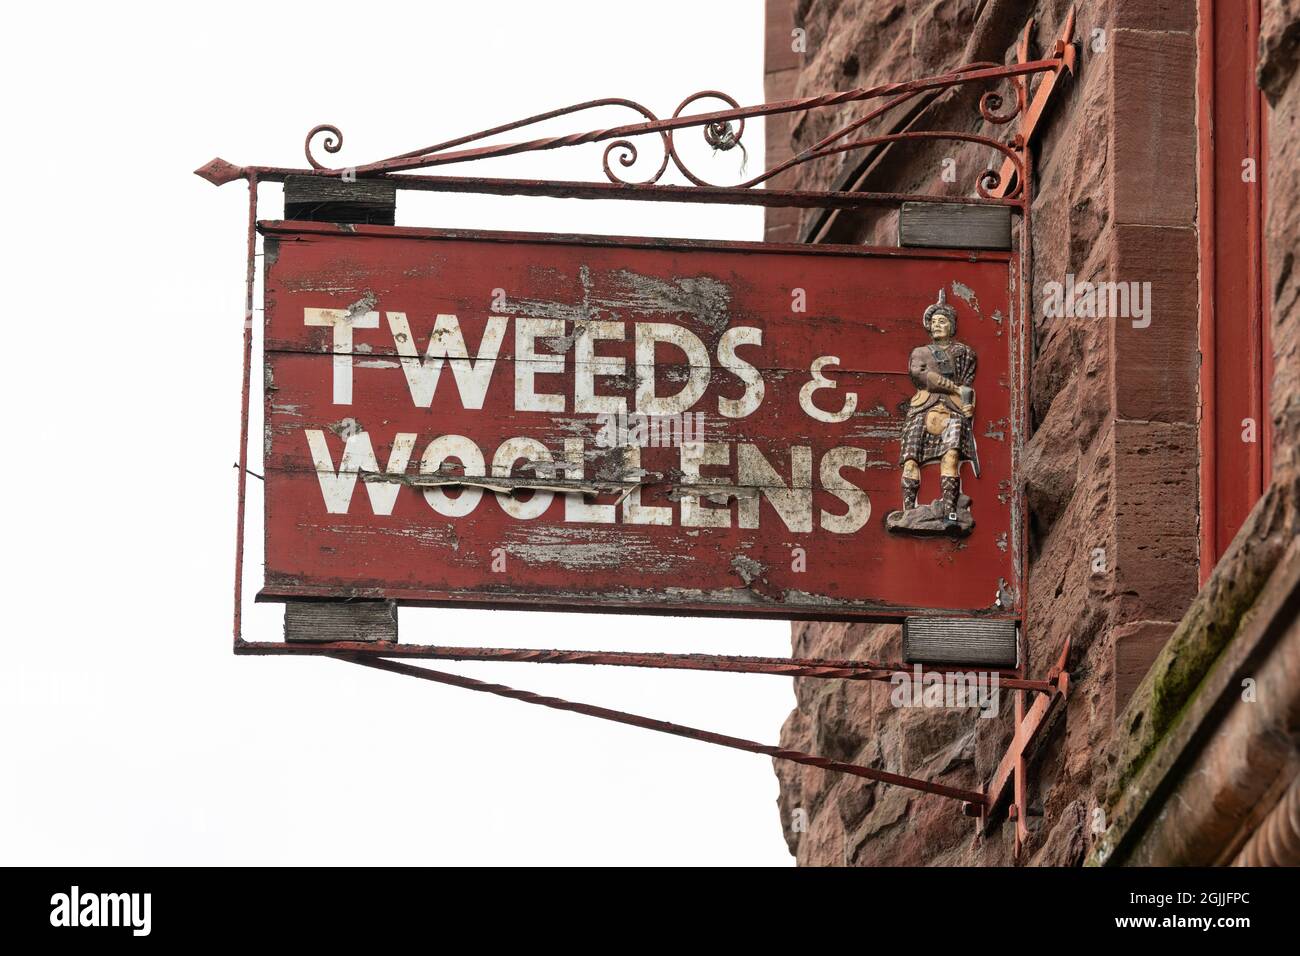 Scottish tweed - Tweeds and woollens sign outside the now closed Haggarts Tweeds and Woollens store, Aberfeldy, Scotland, UK Stock Photo